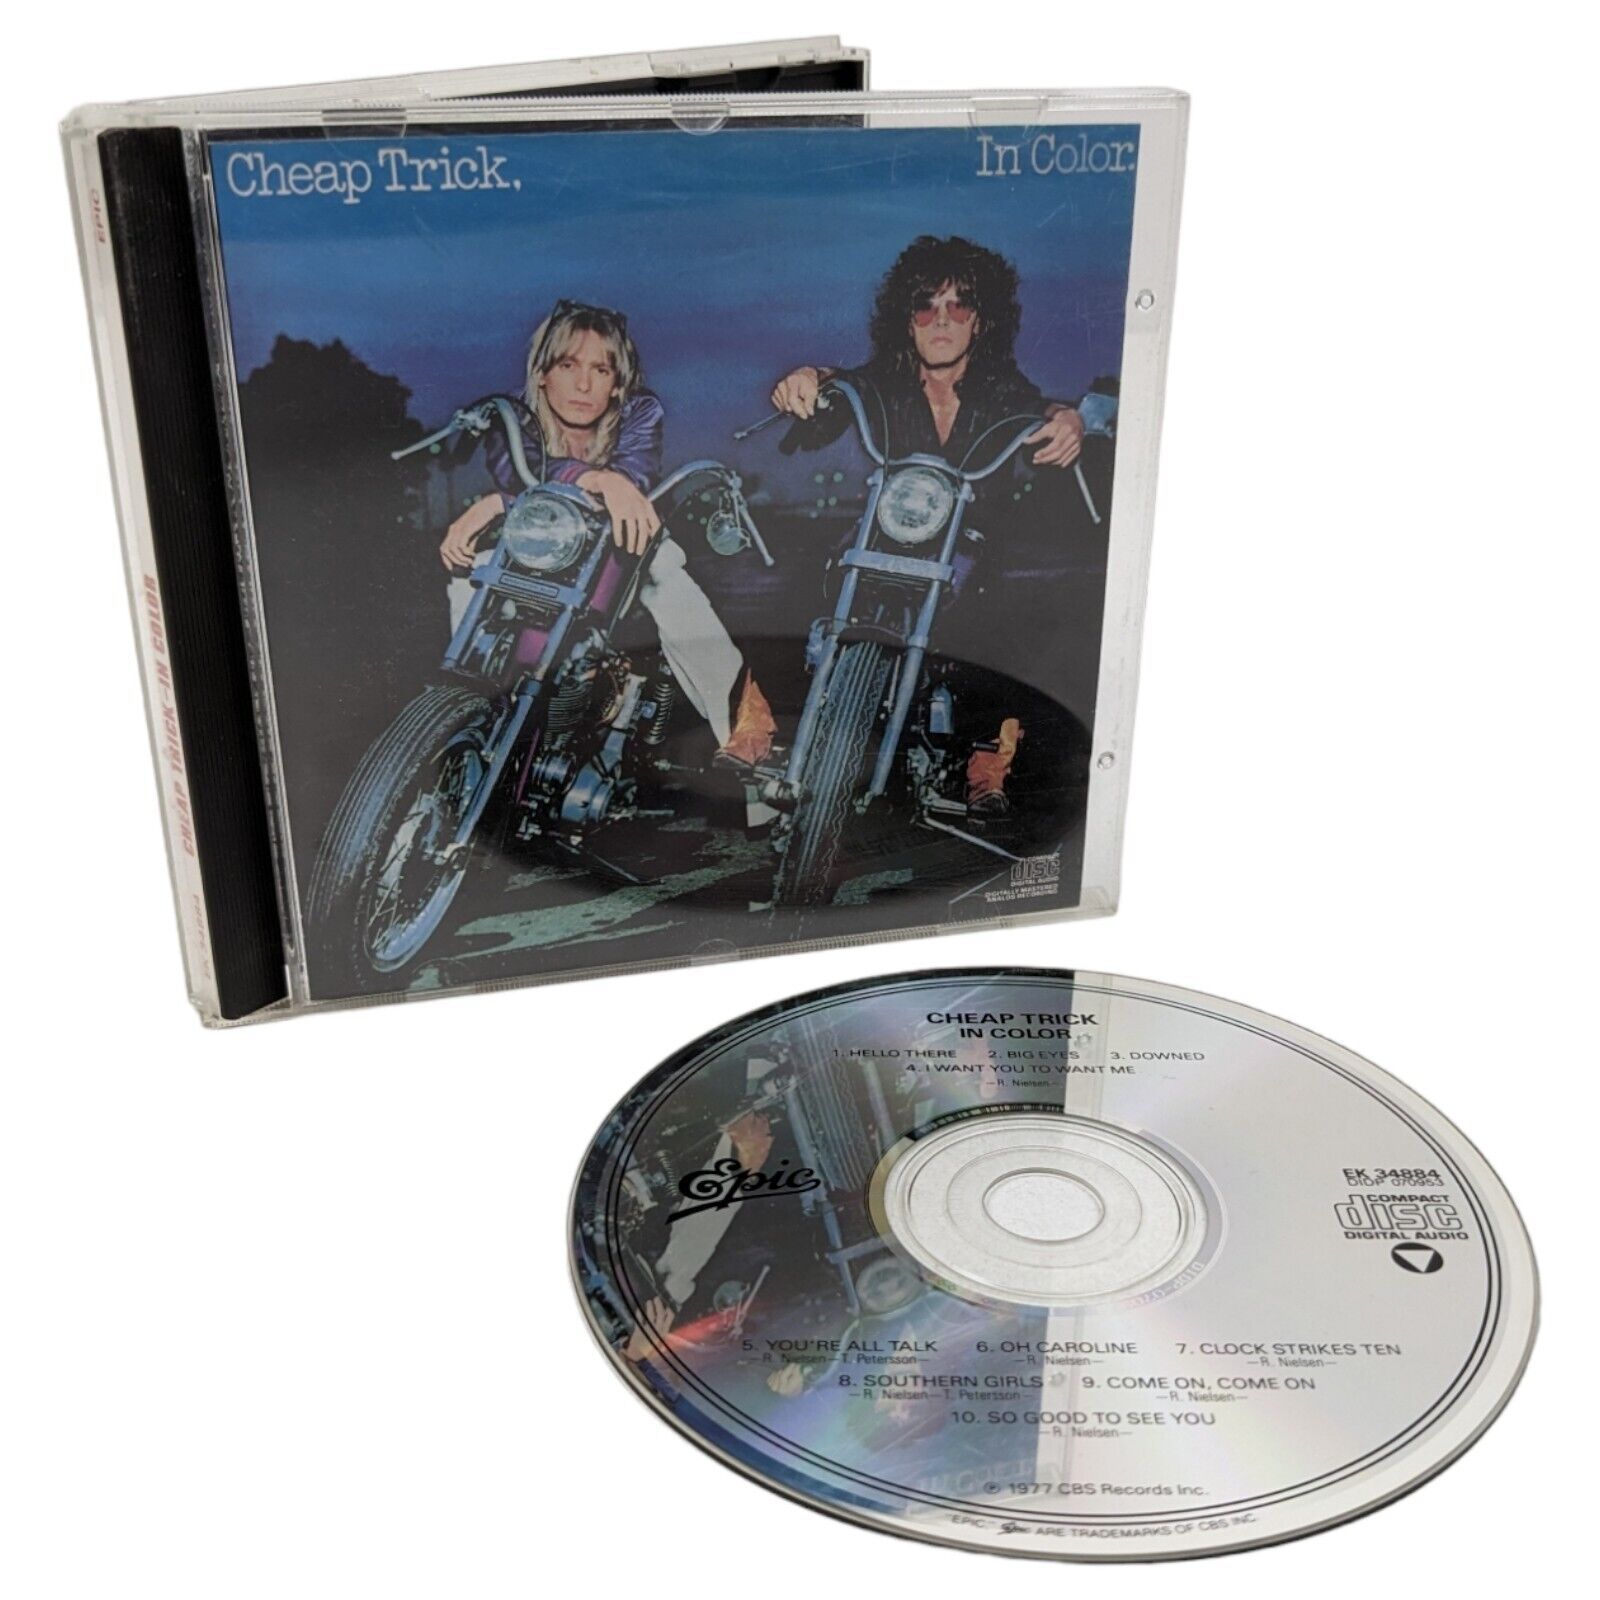 Cheap Trick - In Color [Reissue] (Used CD, 1977)